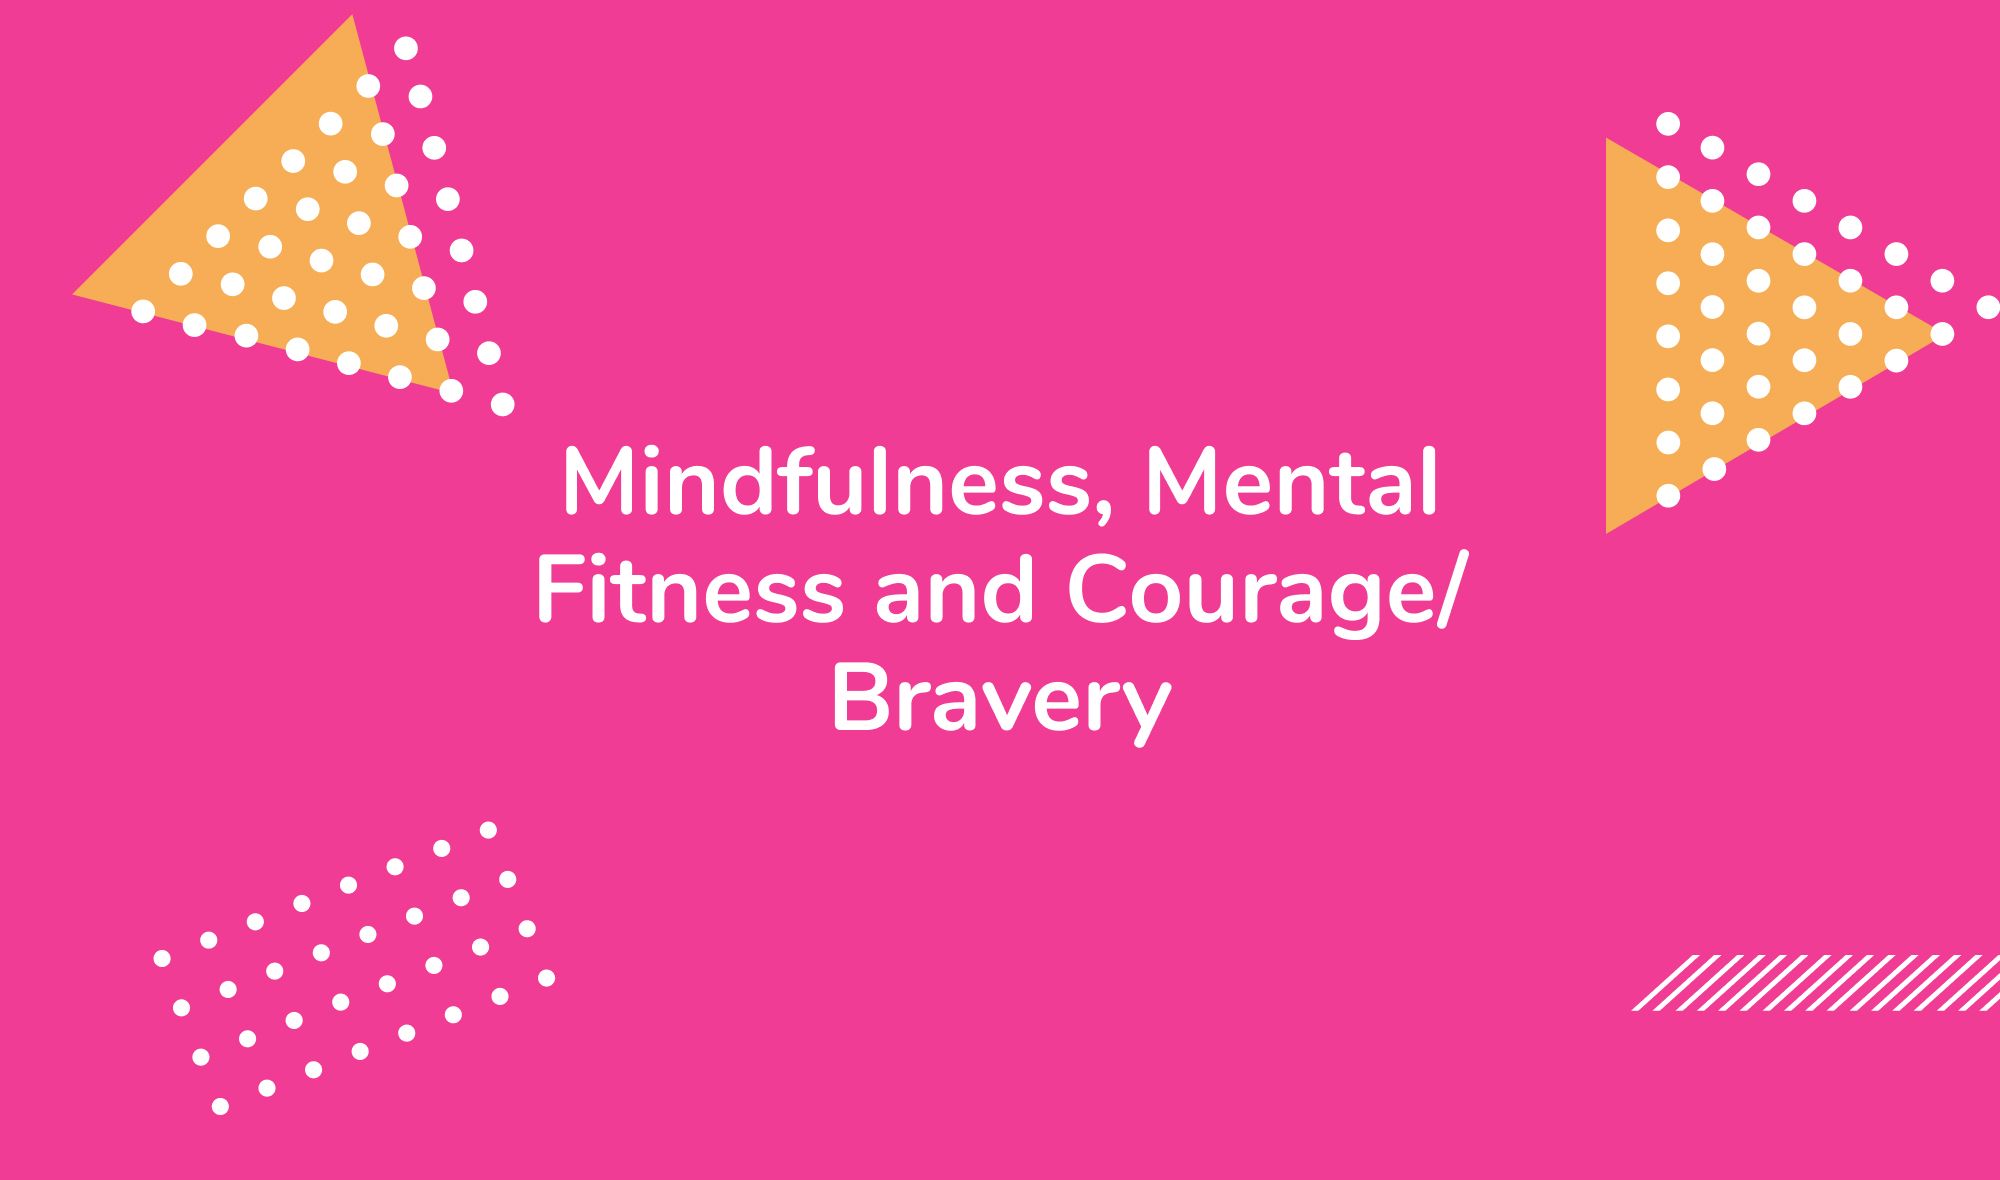 Mindfulness, Mental Fitness and Courage/Bravery